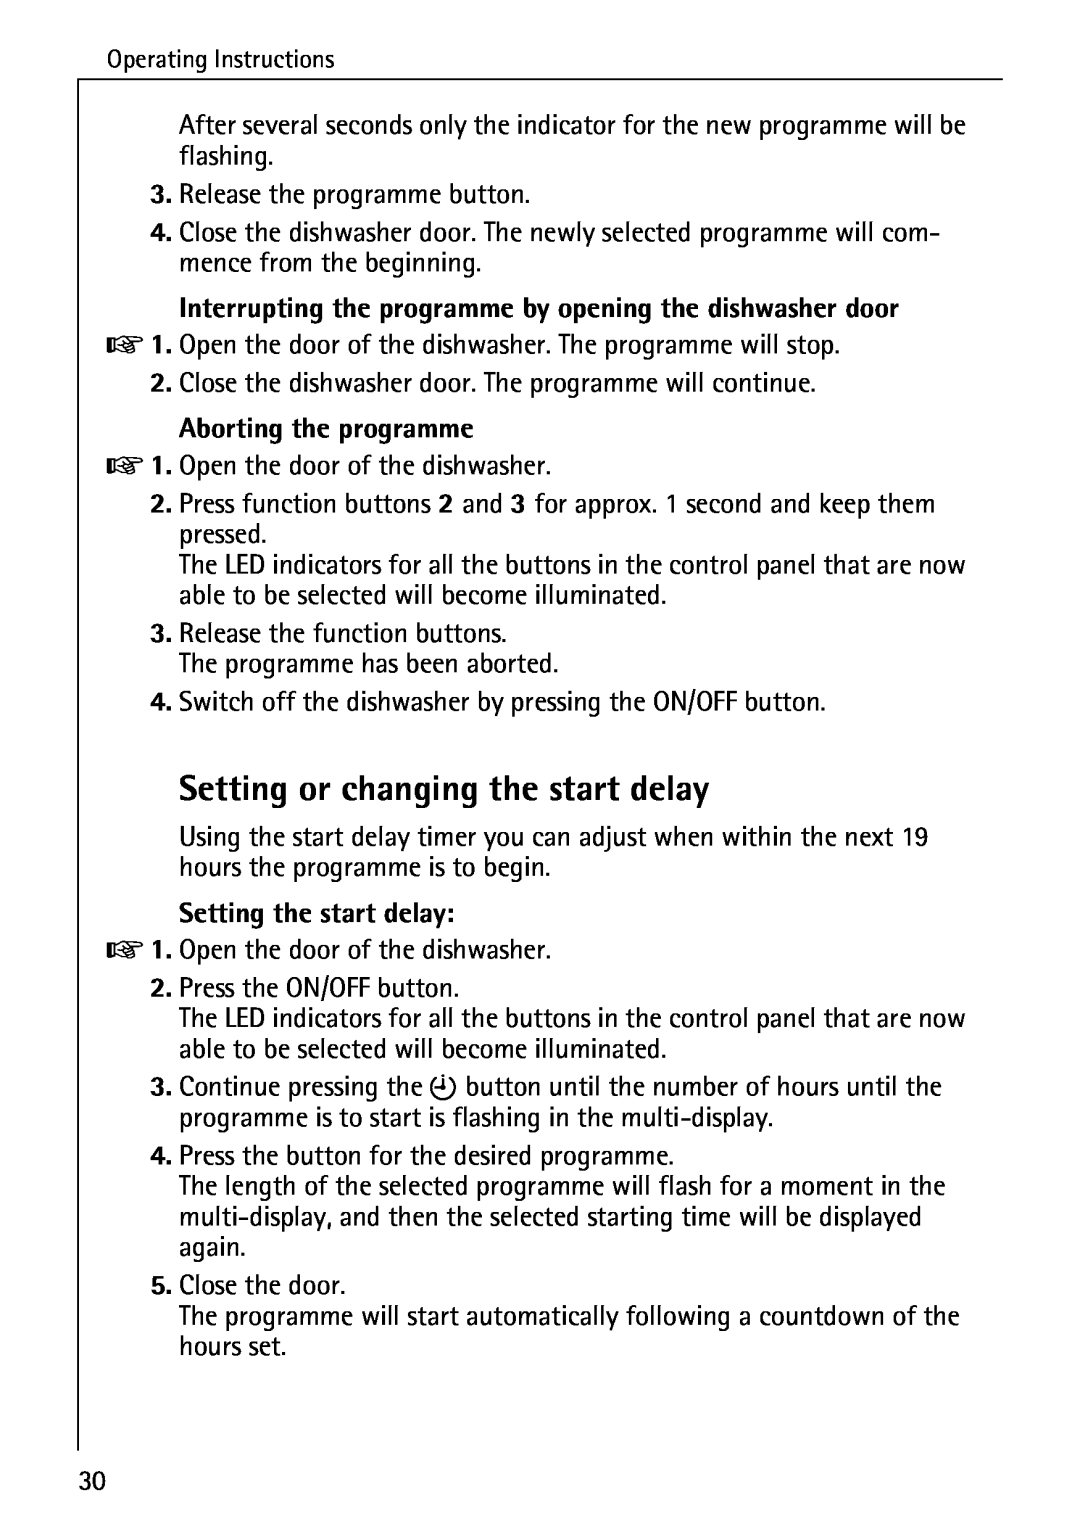 Electrolux 85050 VI manual Setting or changing the start delay, Interrupting the programme by opening the dishwasher door 